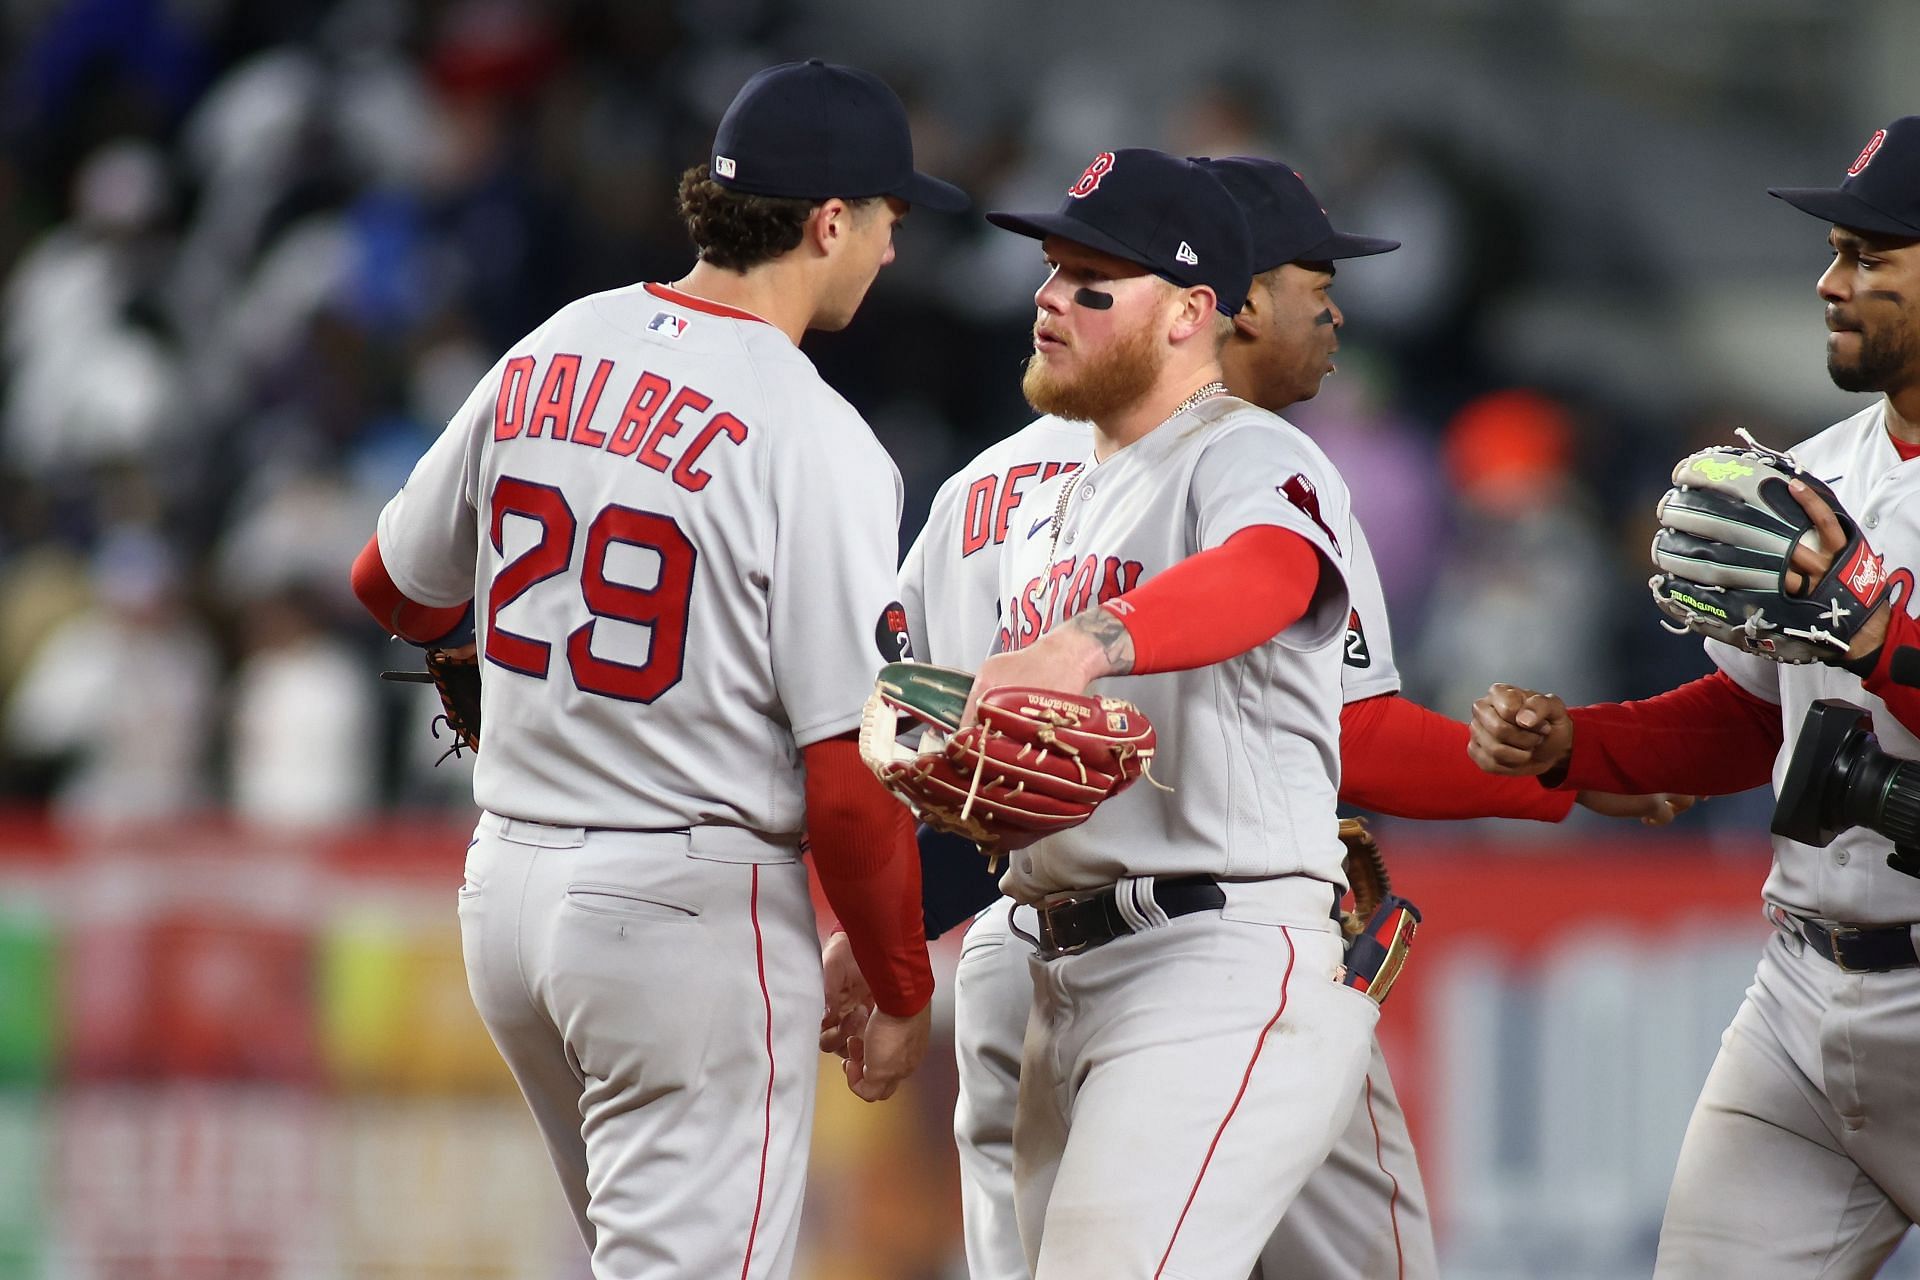 The Boston Red Sox won 2-1 in their series against the Tigers in Detroit